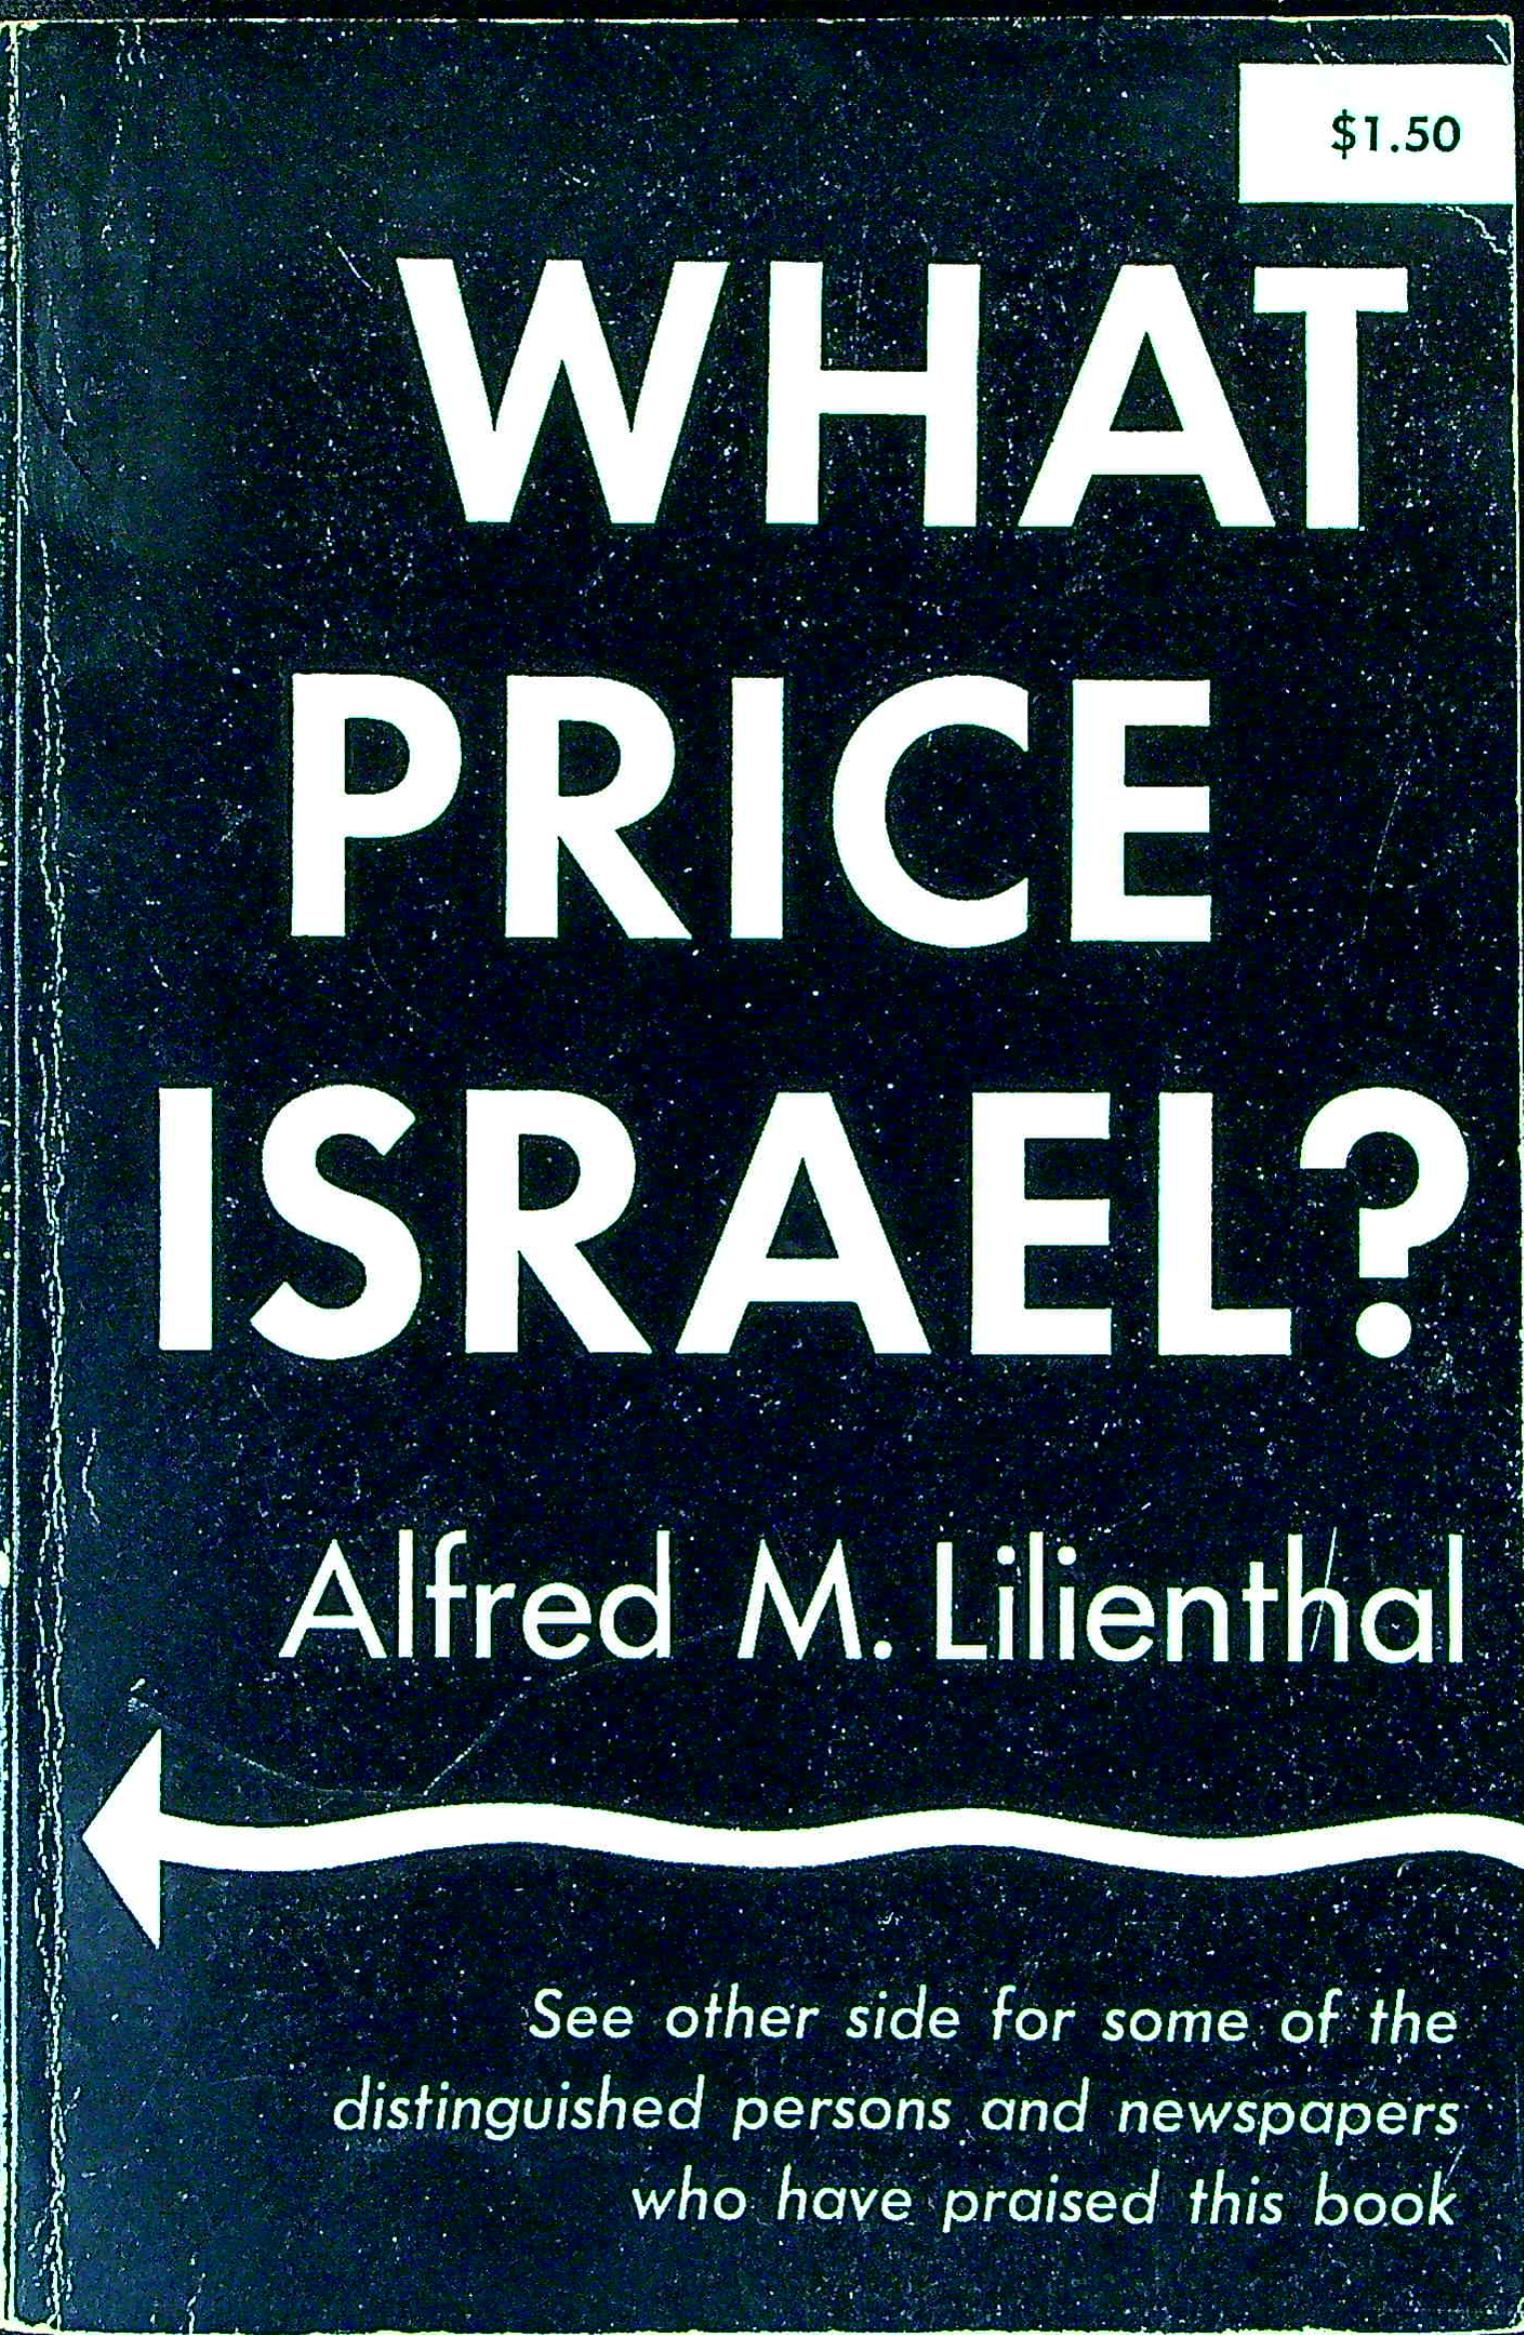 lilienthal book